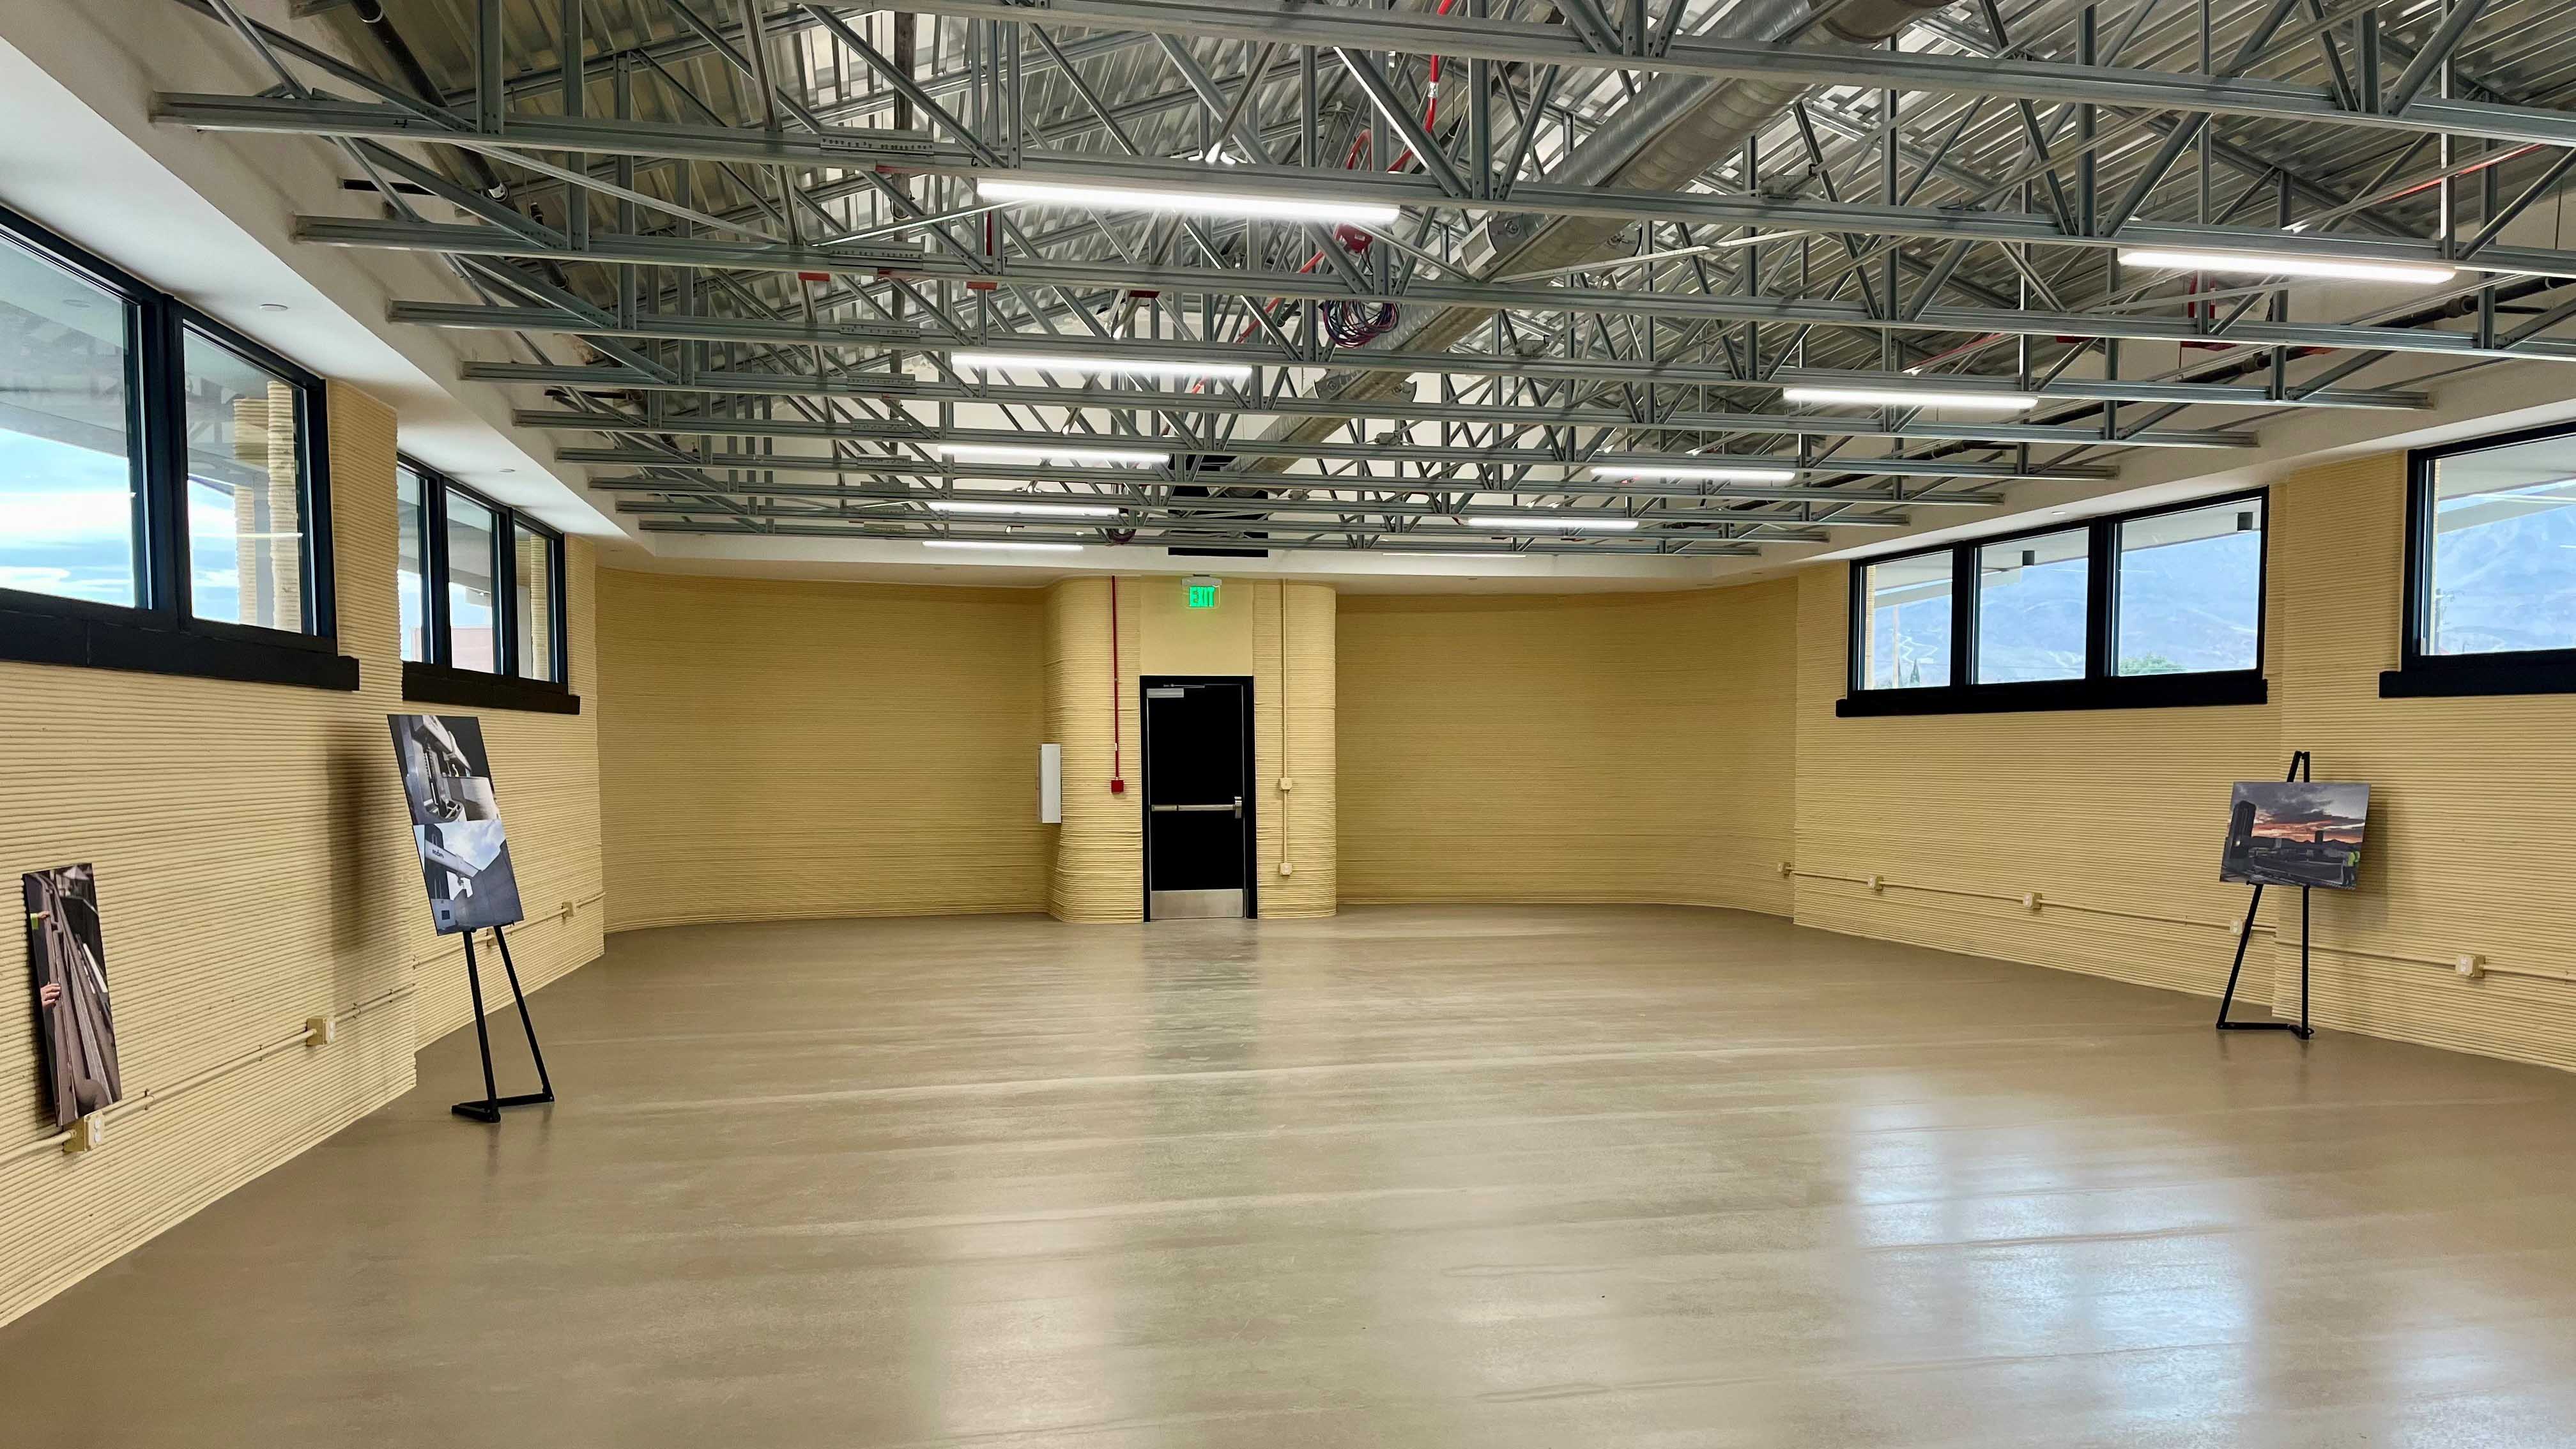 Inside look at the new 3D barracks at Fort Bliss, Texas.